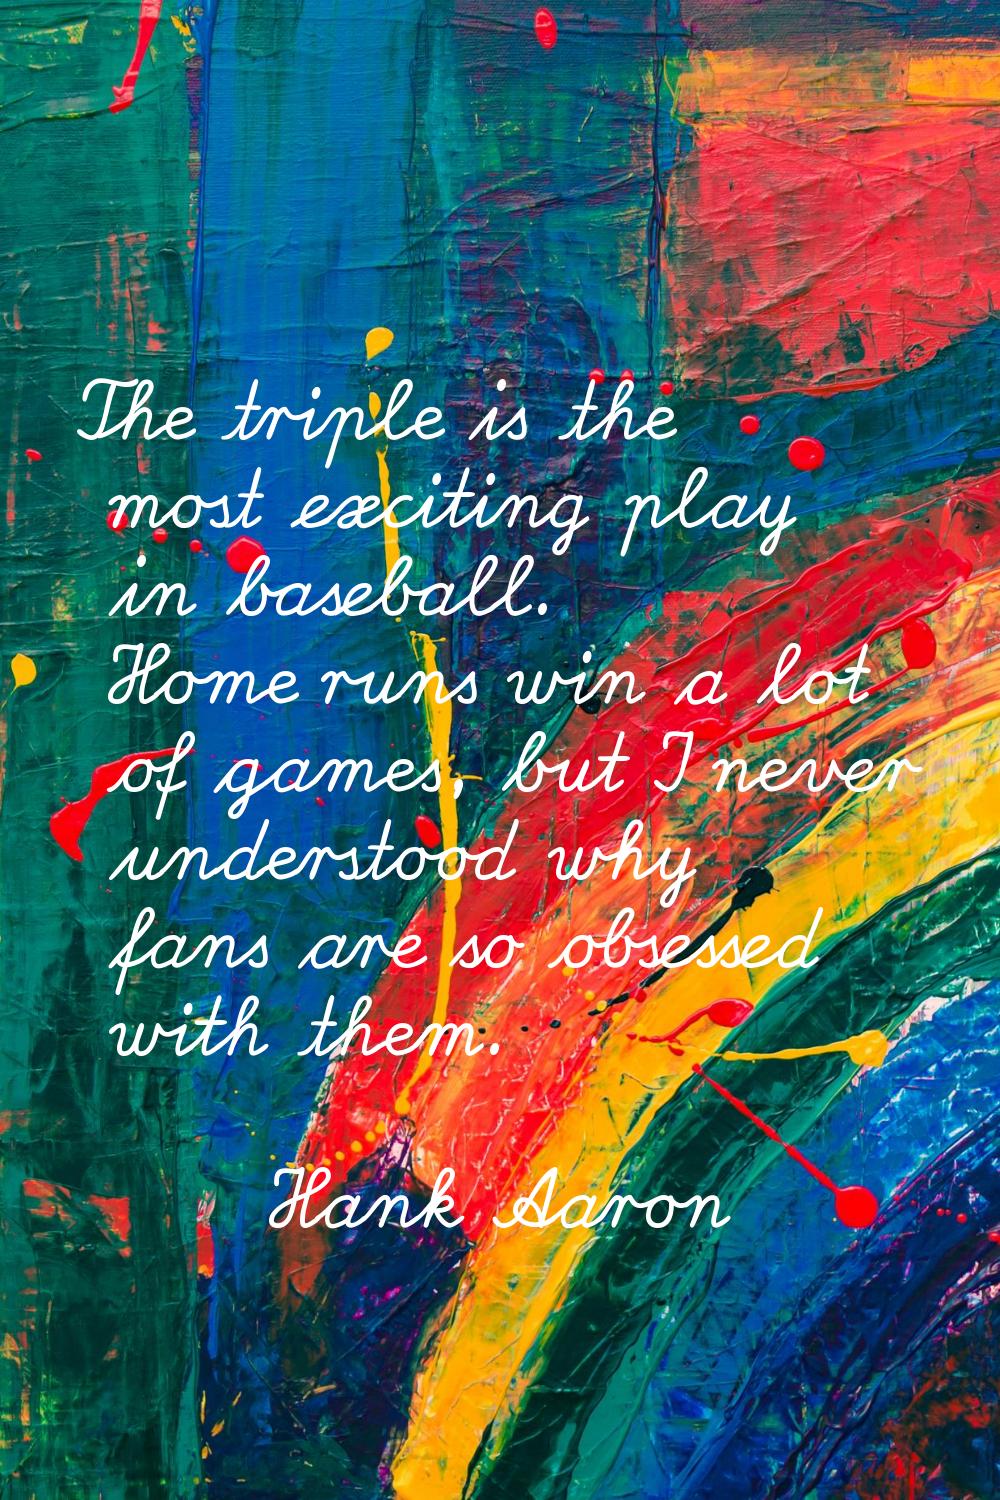 The triple is the most exciting play in baseball. Home runs win a lot of games, but I never underst